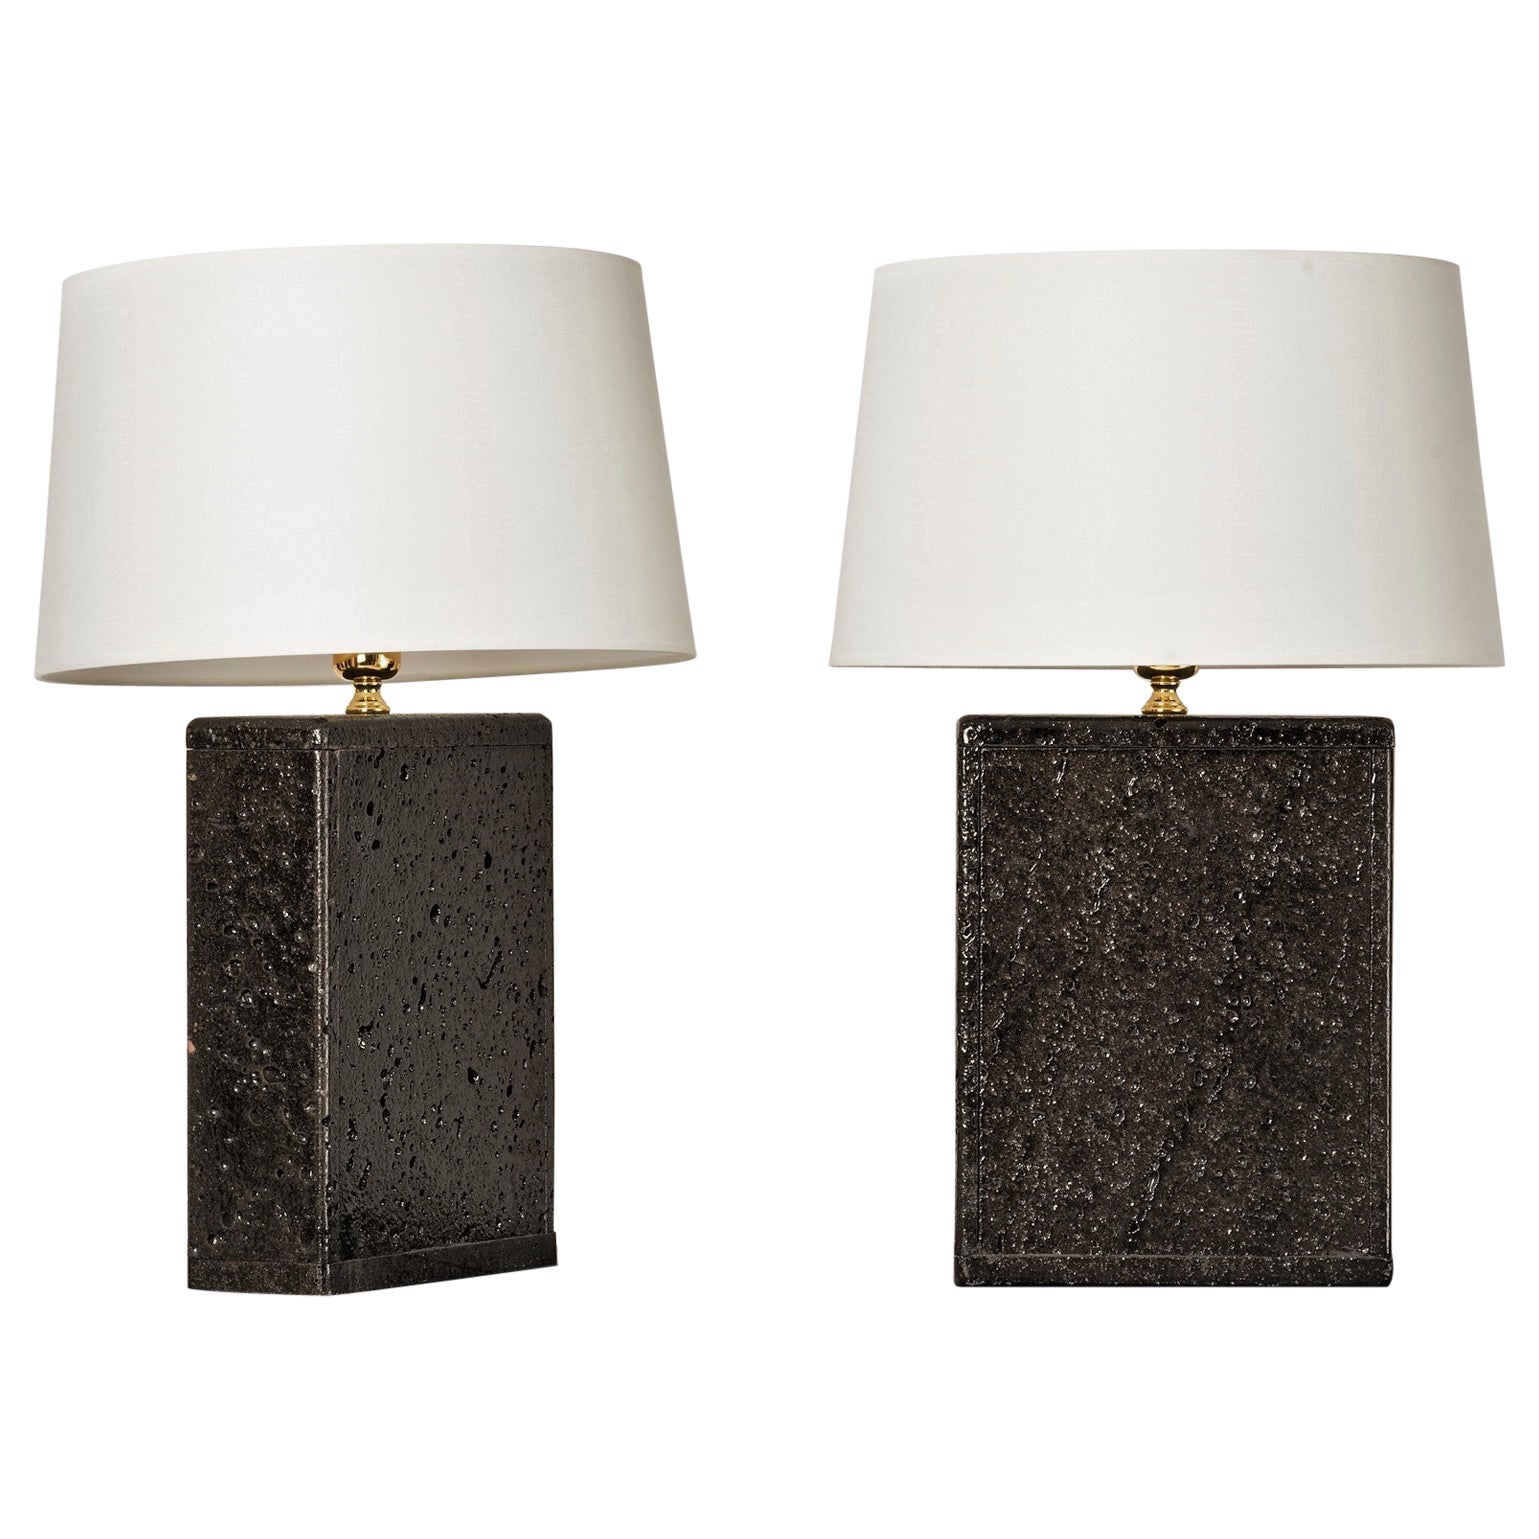 Pair of Deep Black Glazed Lava Stone Table Lamps, France, 1970's For Sale